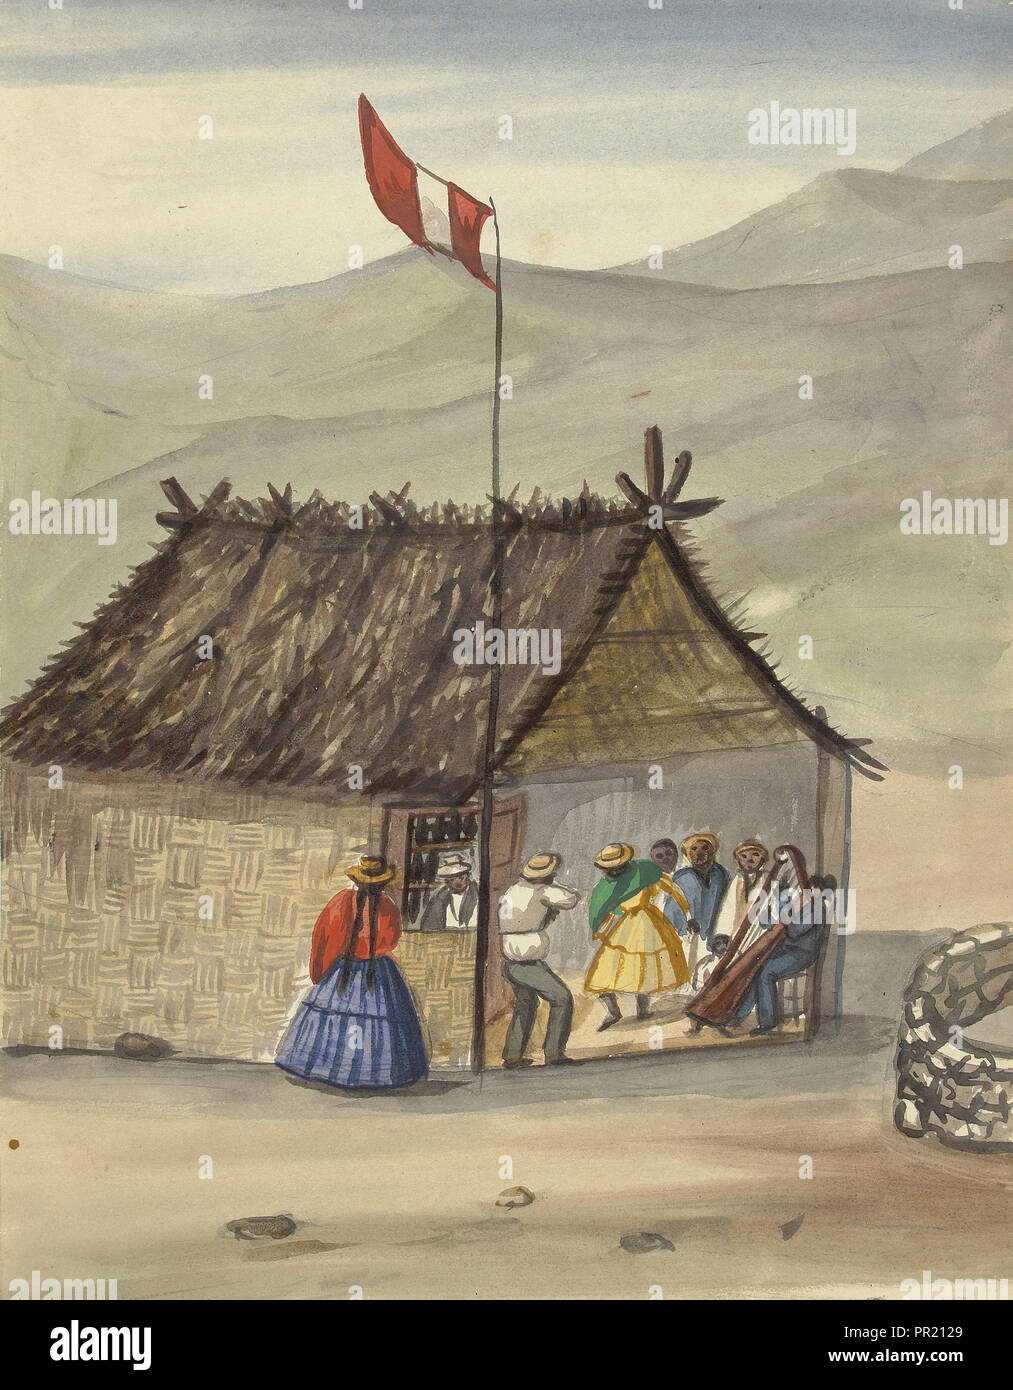 A cane rancho or hut erected for the purpose of dancing, Lima costumes, ca. 1853, Fierro, Pancho, 1803-1879, Smith, Archibald Stock Photo